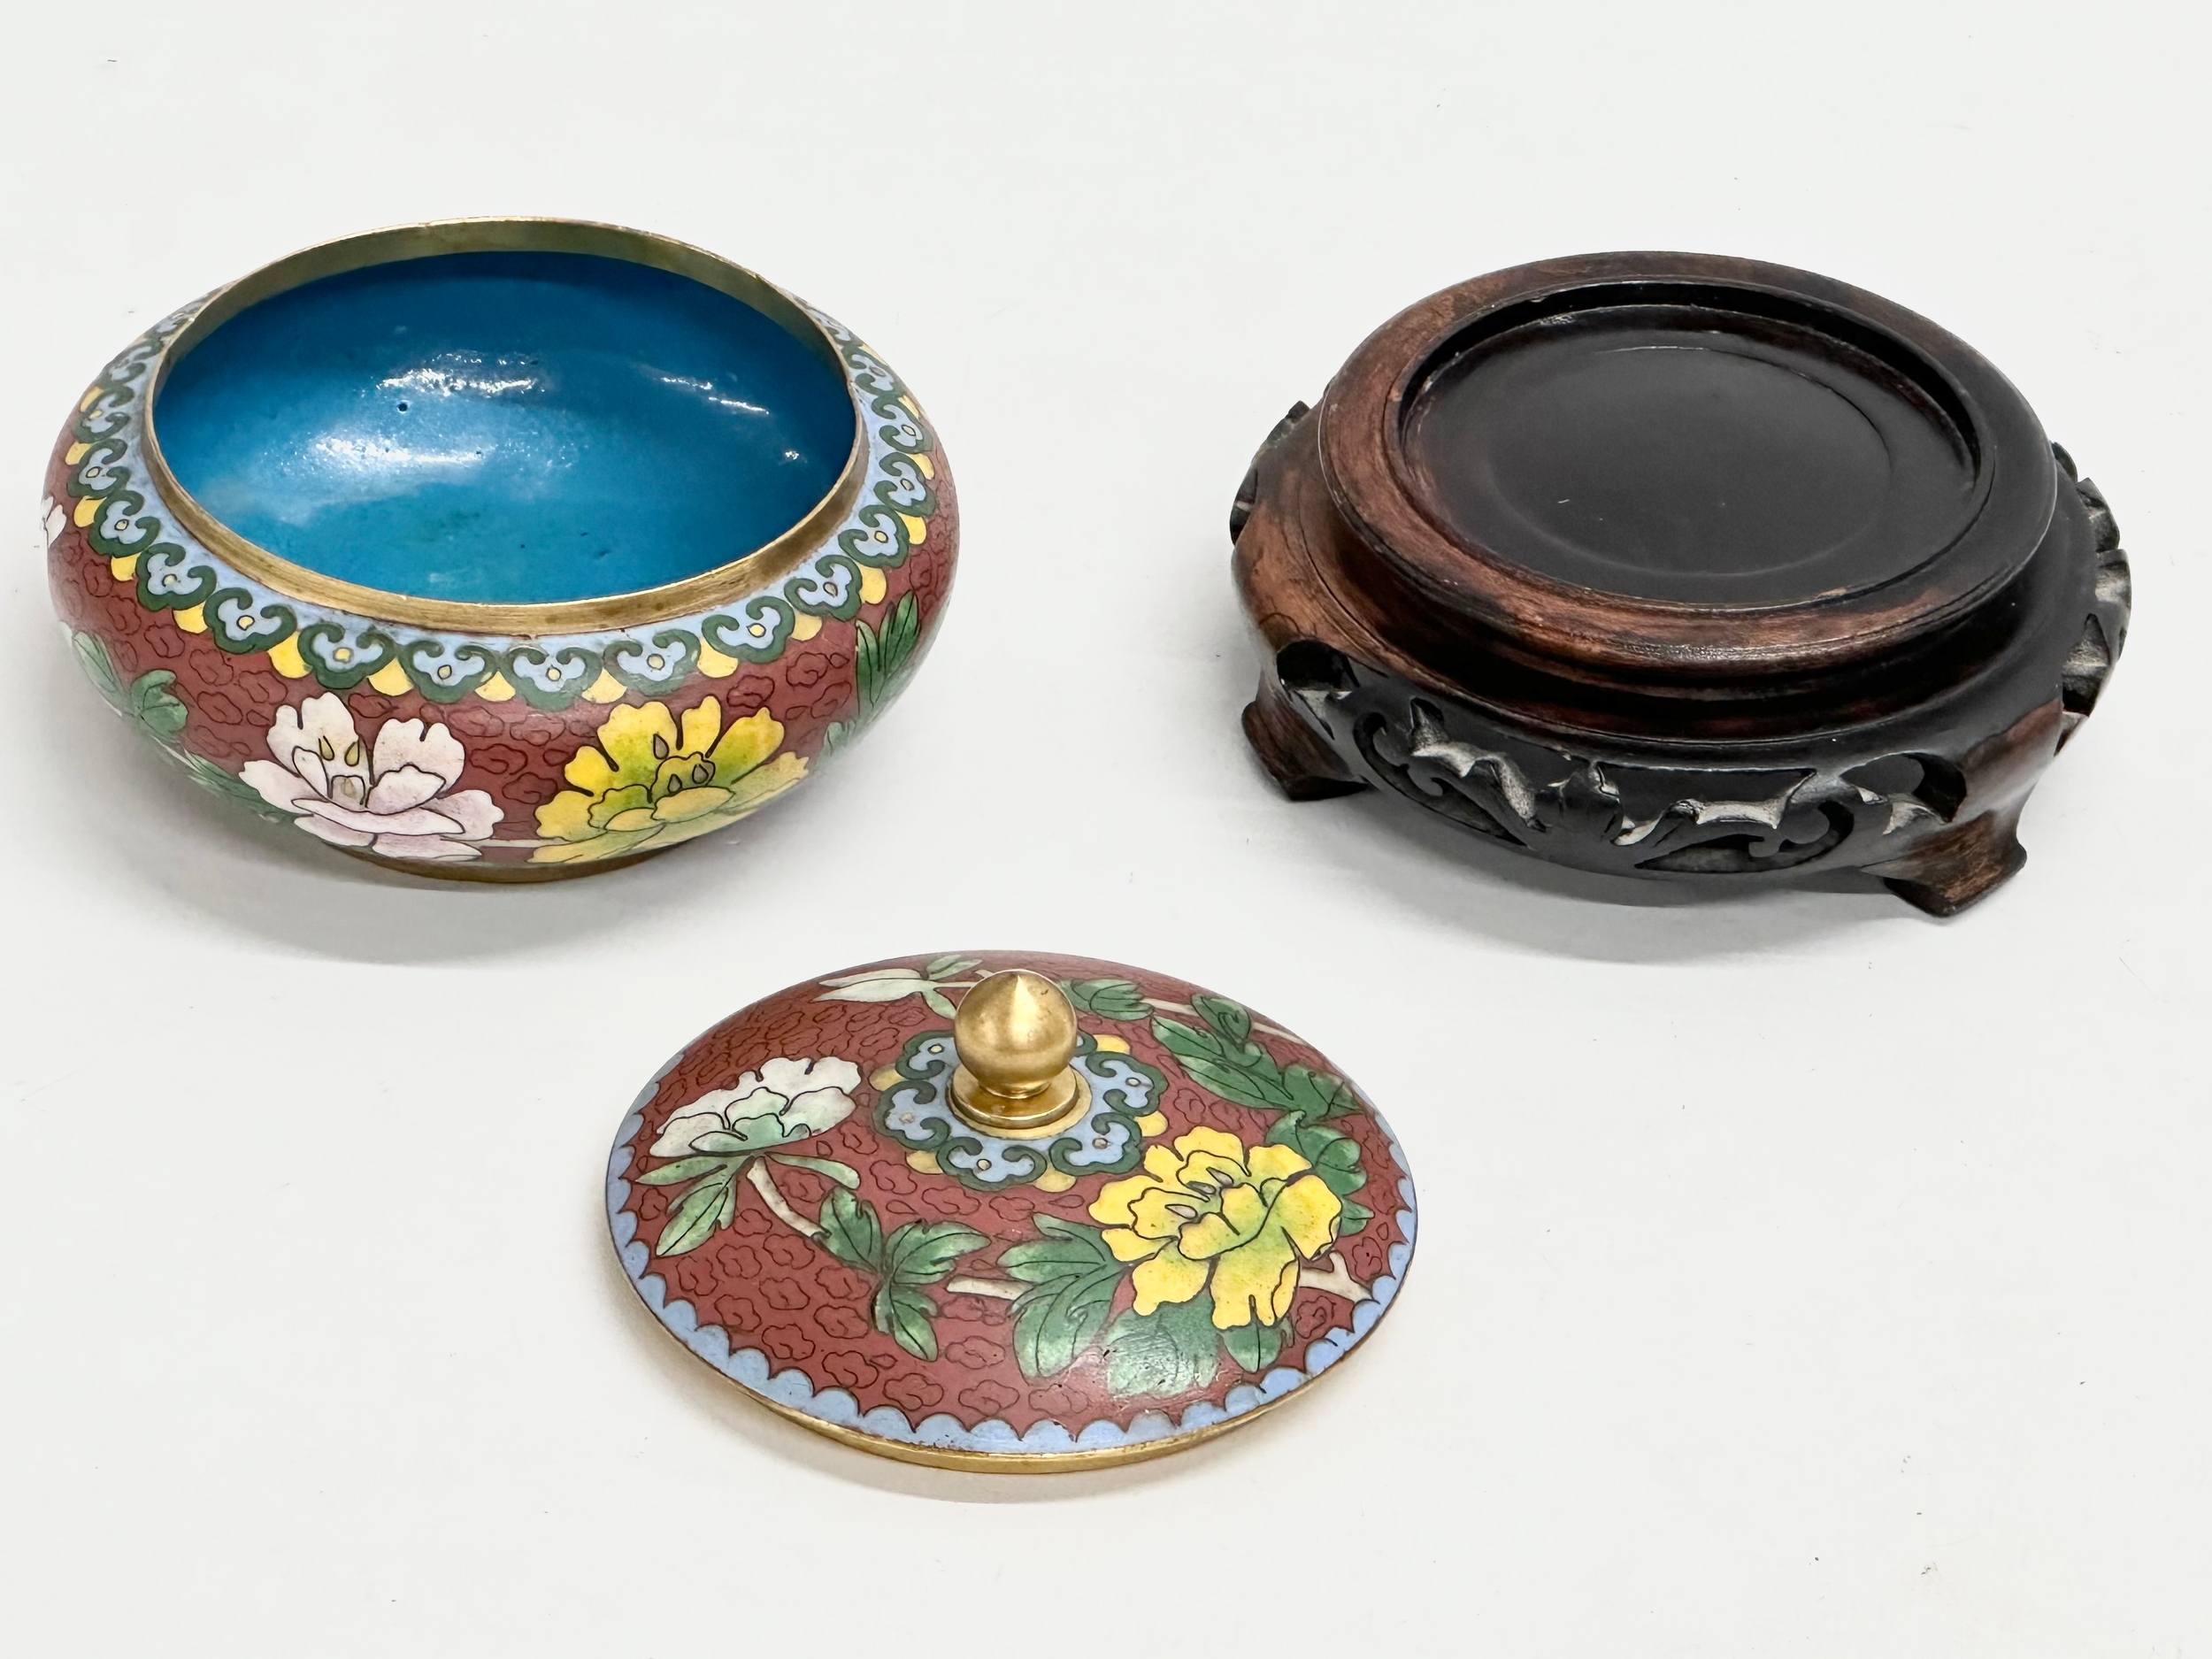 An Early 20th Century Cloisonné enamel pot on stand. 10x10x11cm including stand. - Image 3 of 4